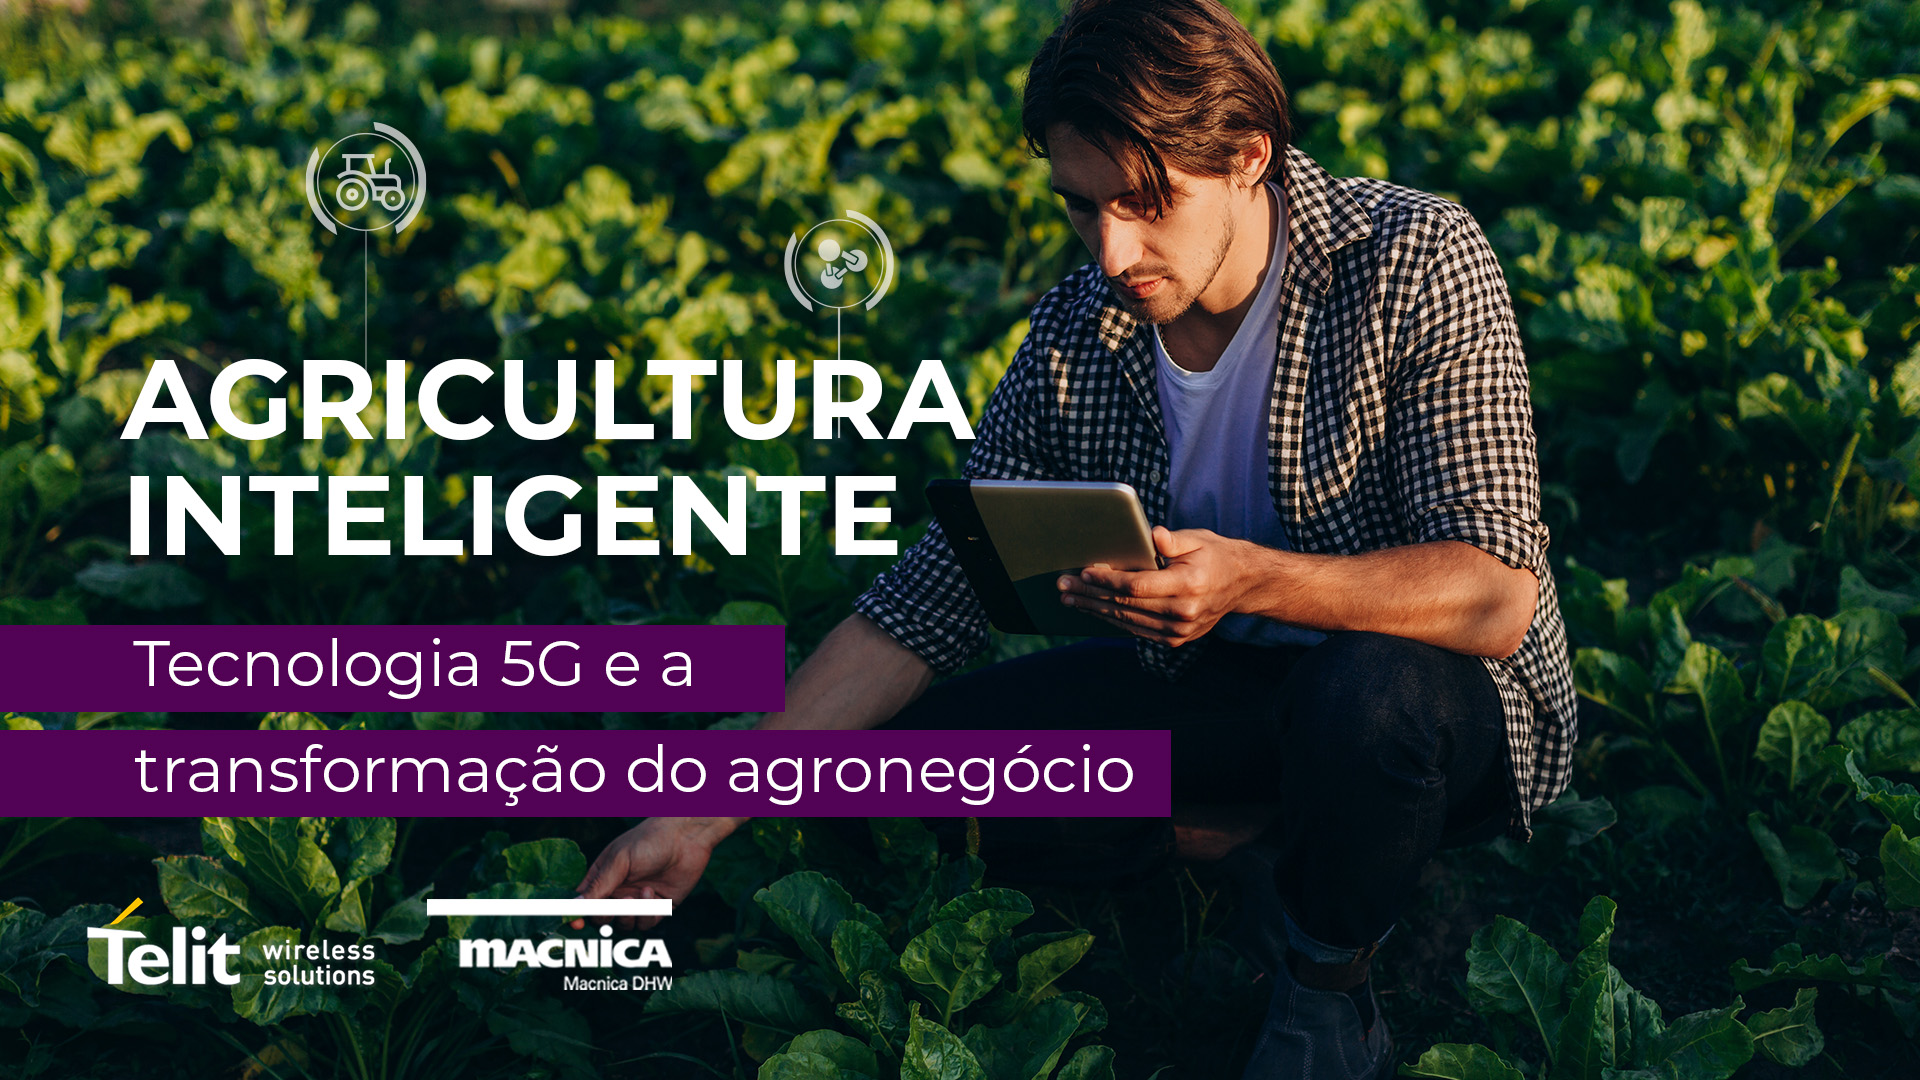 You are currently viewing 5G: Tecnologia para agricultura inteligente